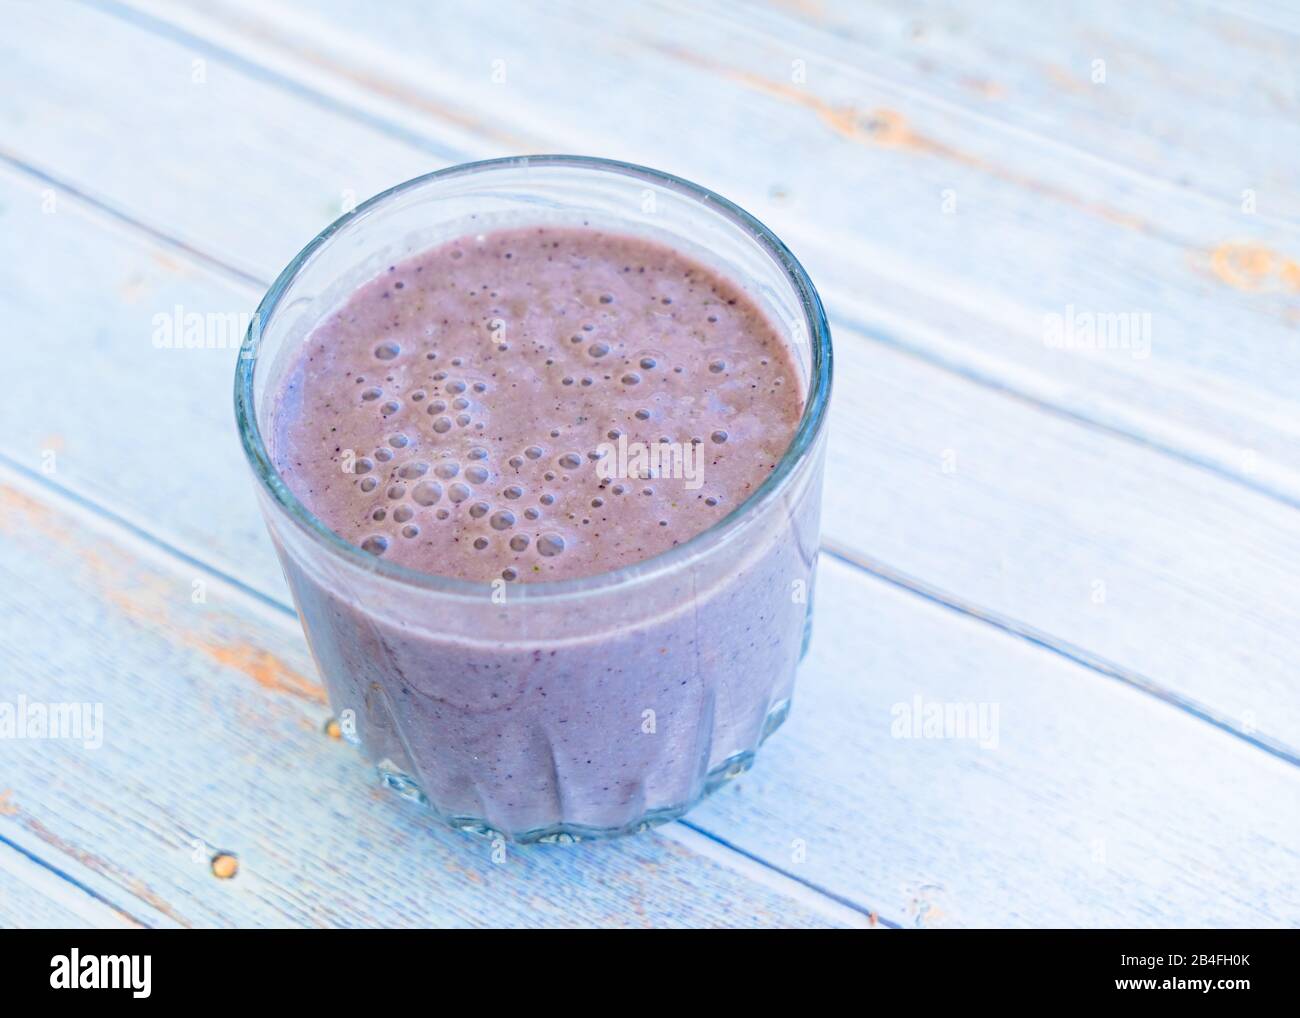 Strawberry blueberry kale smoothie in a glass. Stock Photo